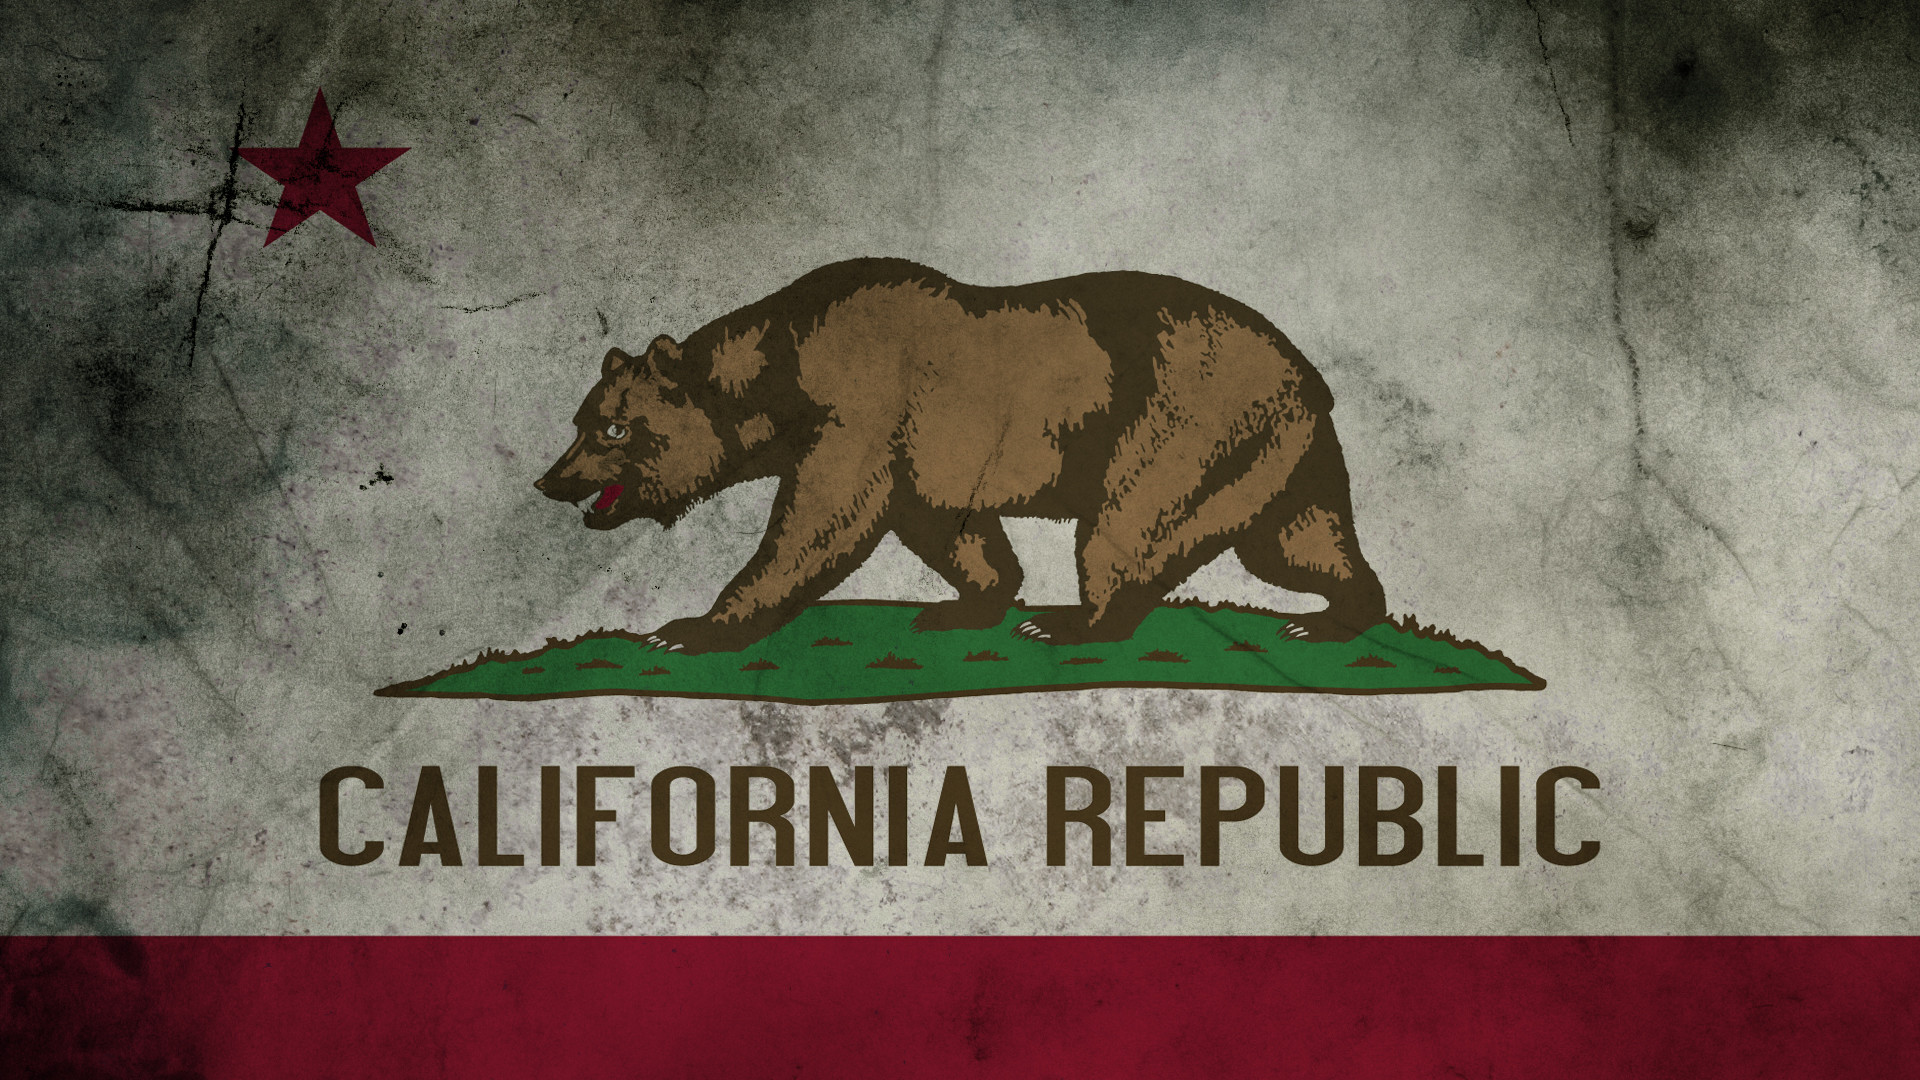 1920x1080 ... backgrounds for california republic wallpaper background www ...